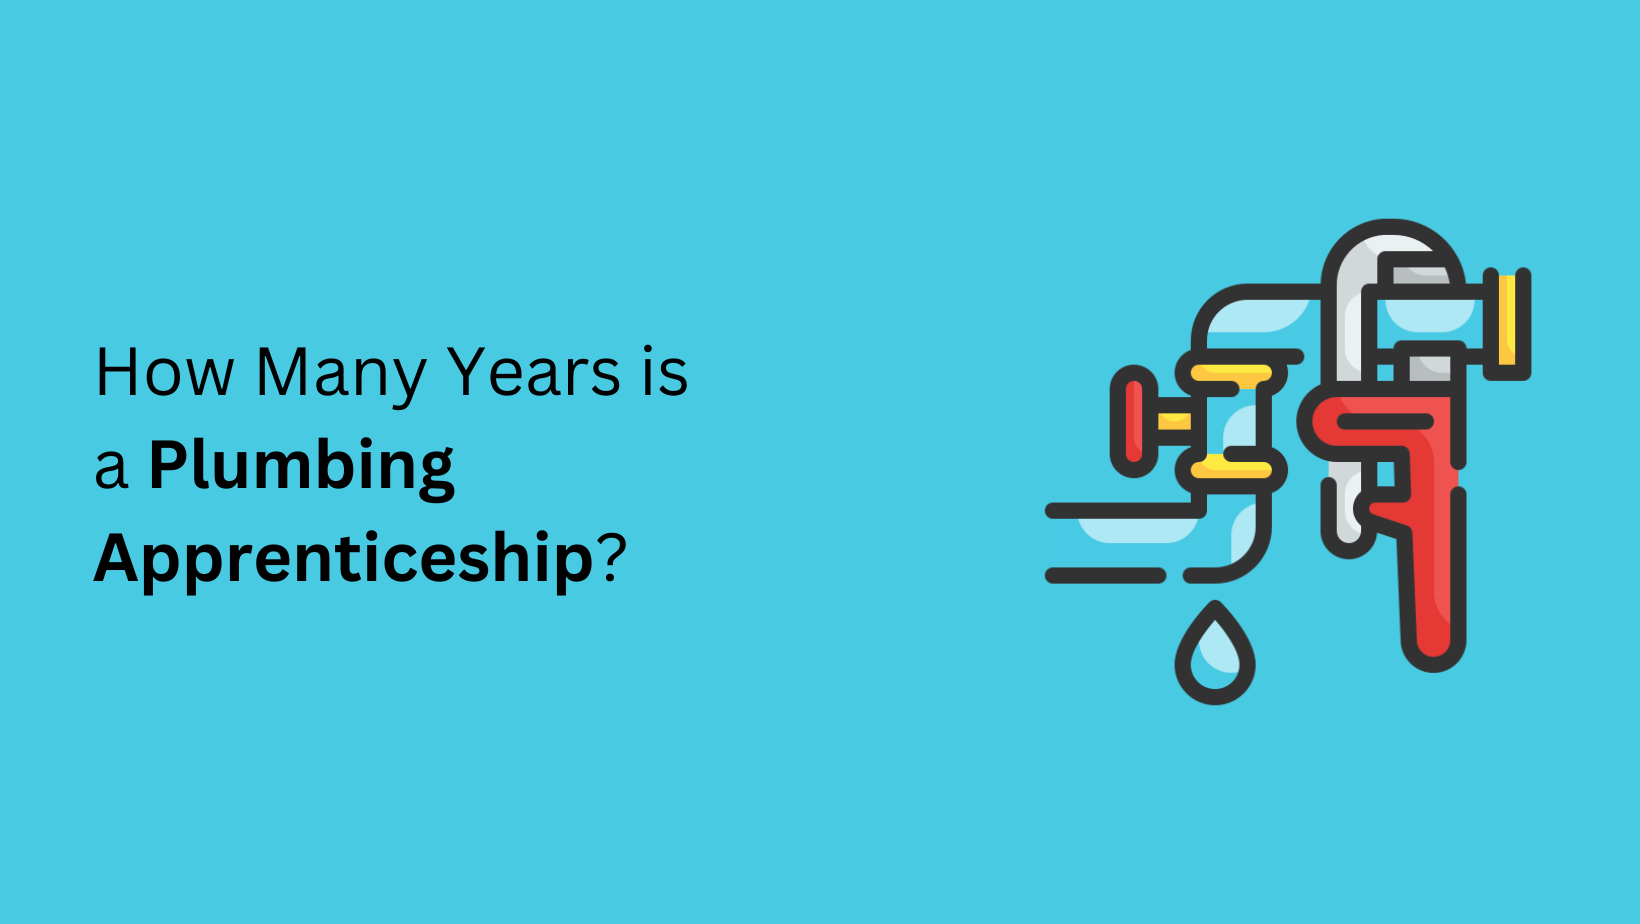 How Many Years is a Plumbing Apprenticeship